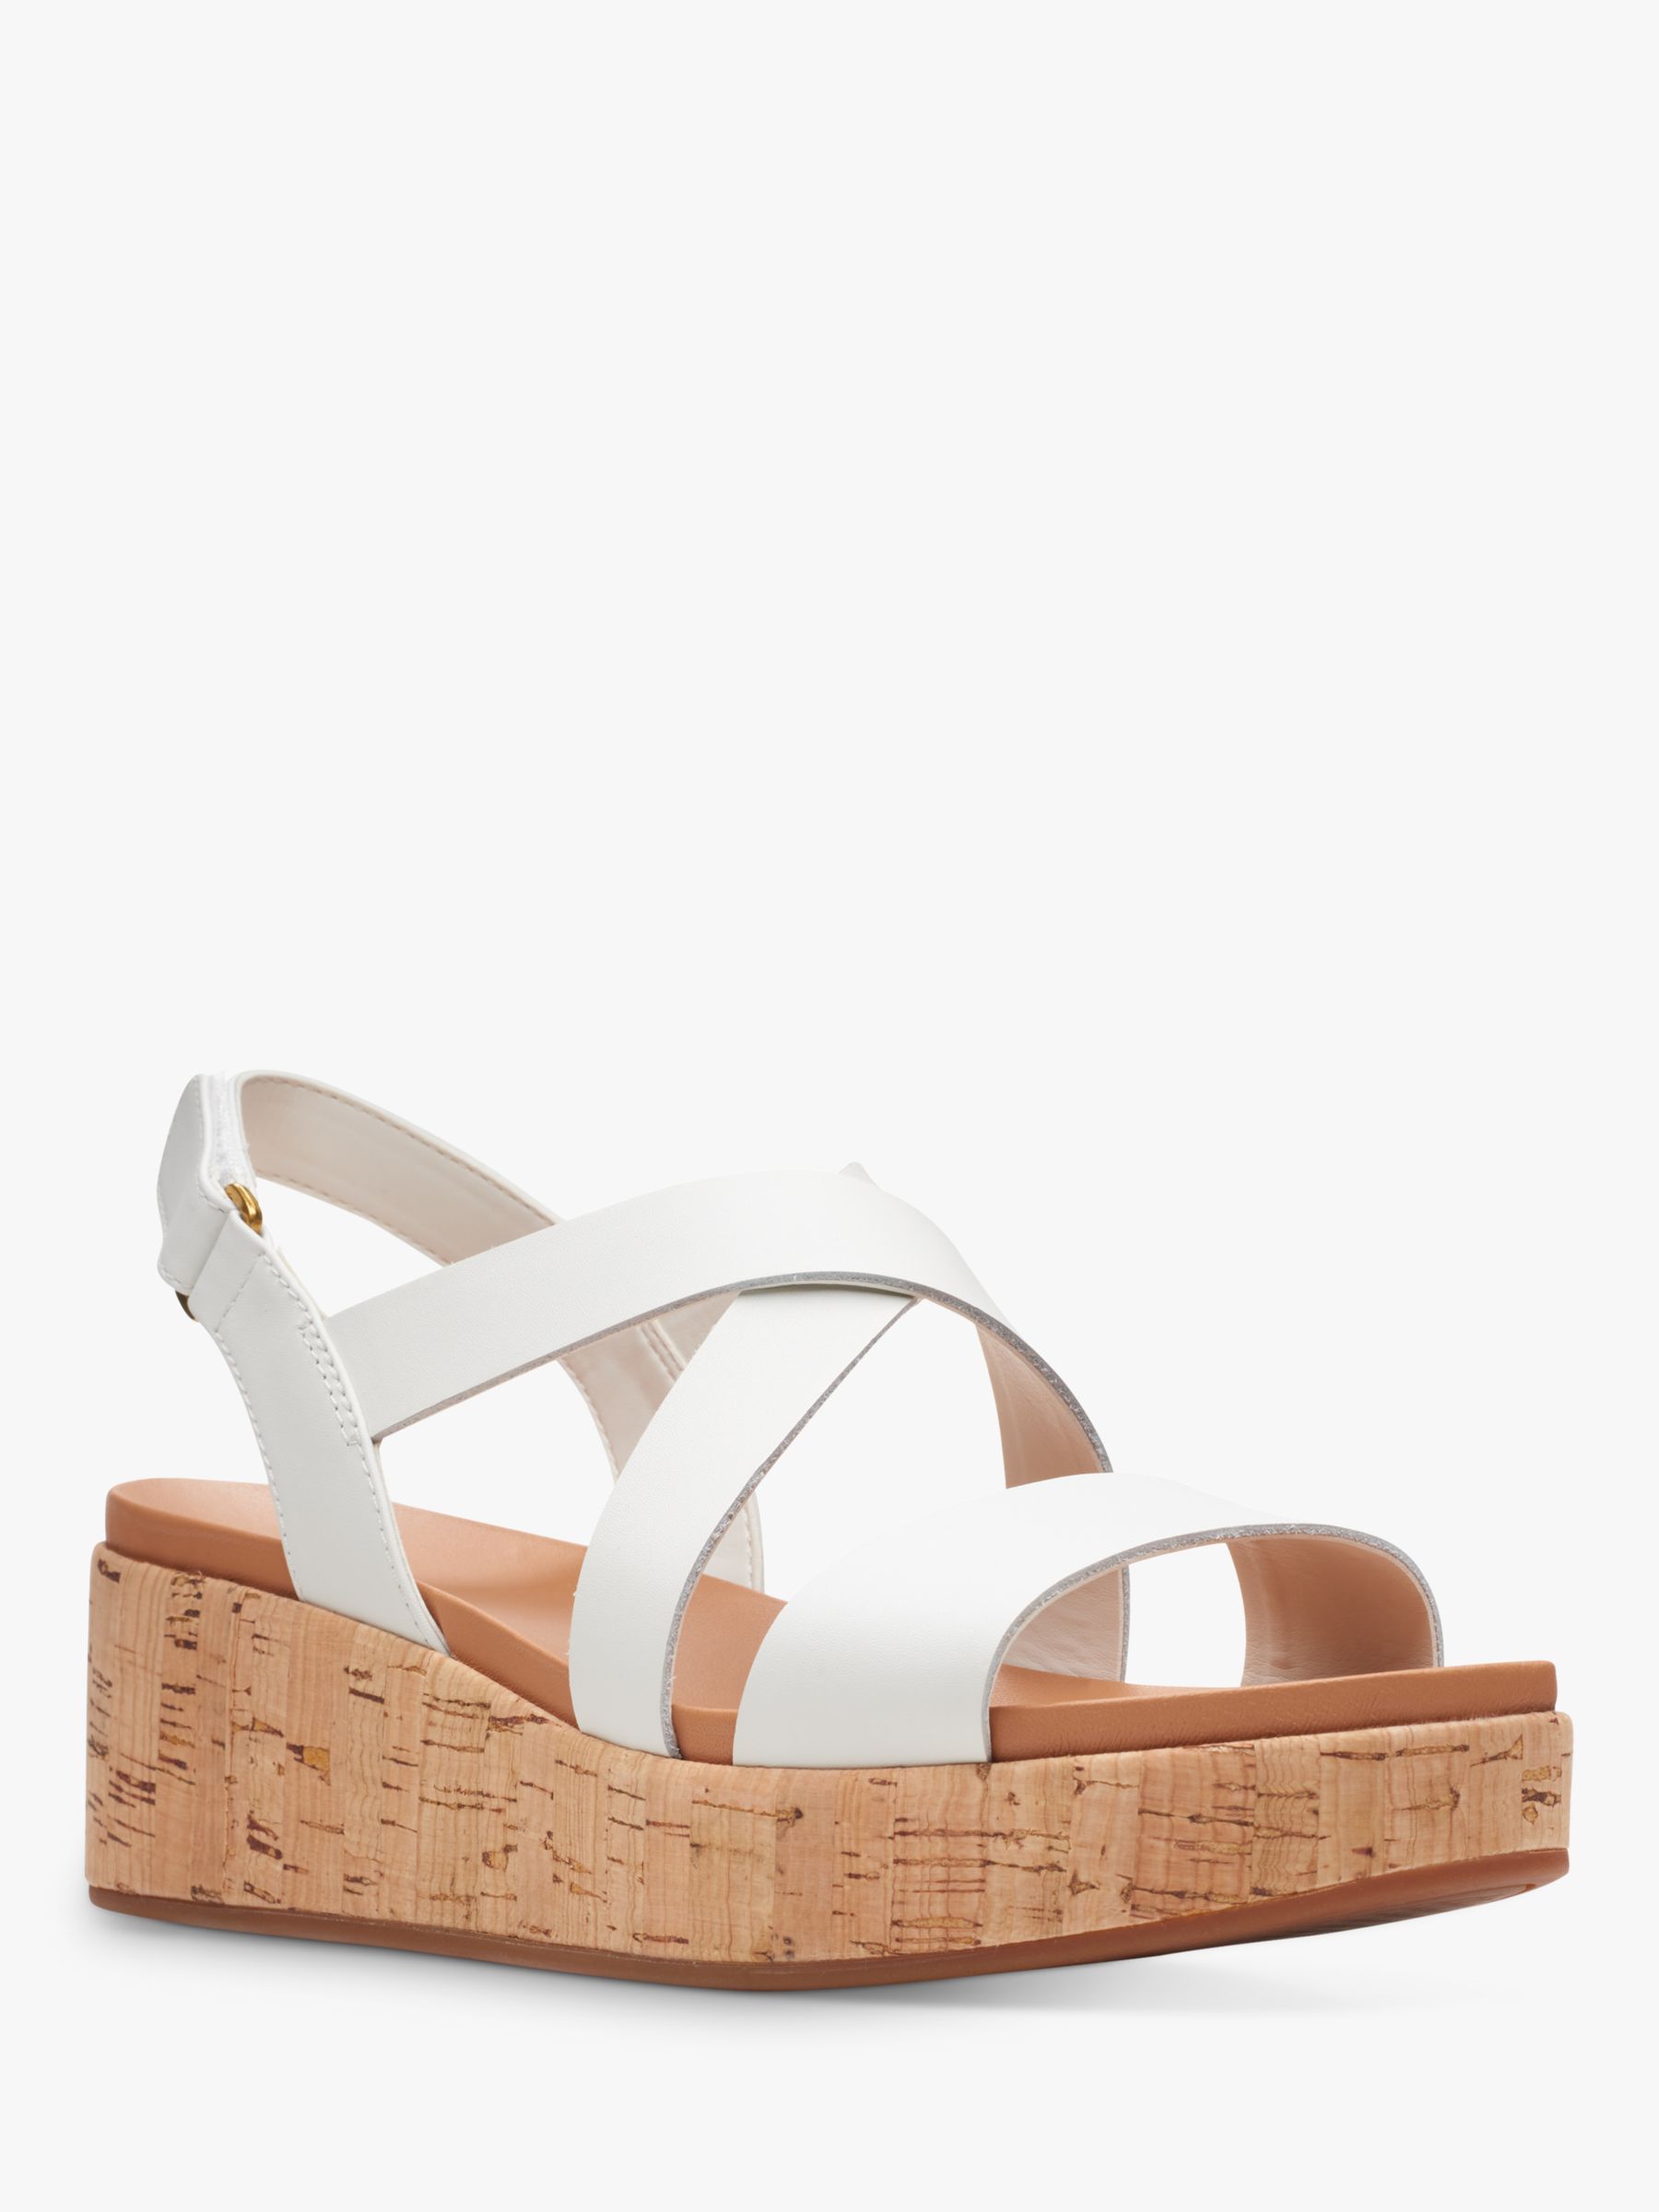 Clarks Kimmei Cork Wide Fit Leather Wedge Sandals, White at John Lewis ...